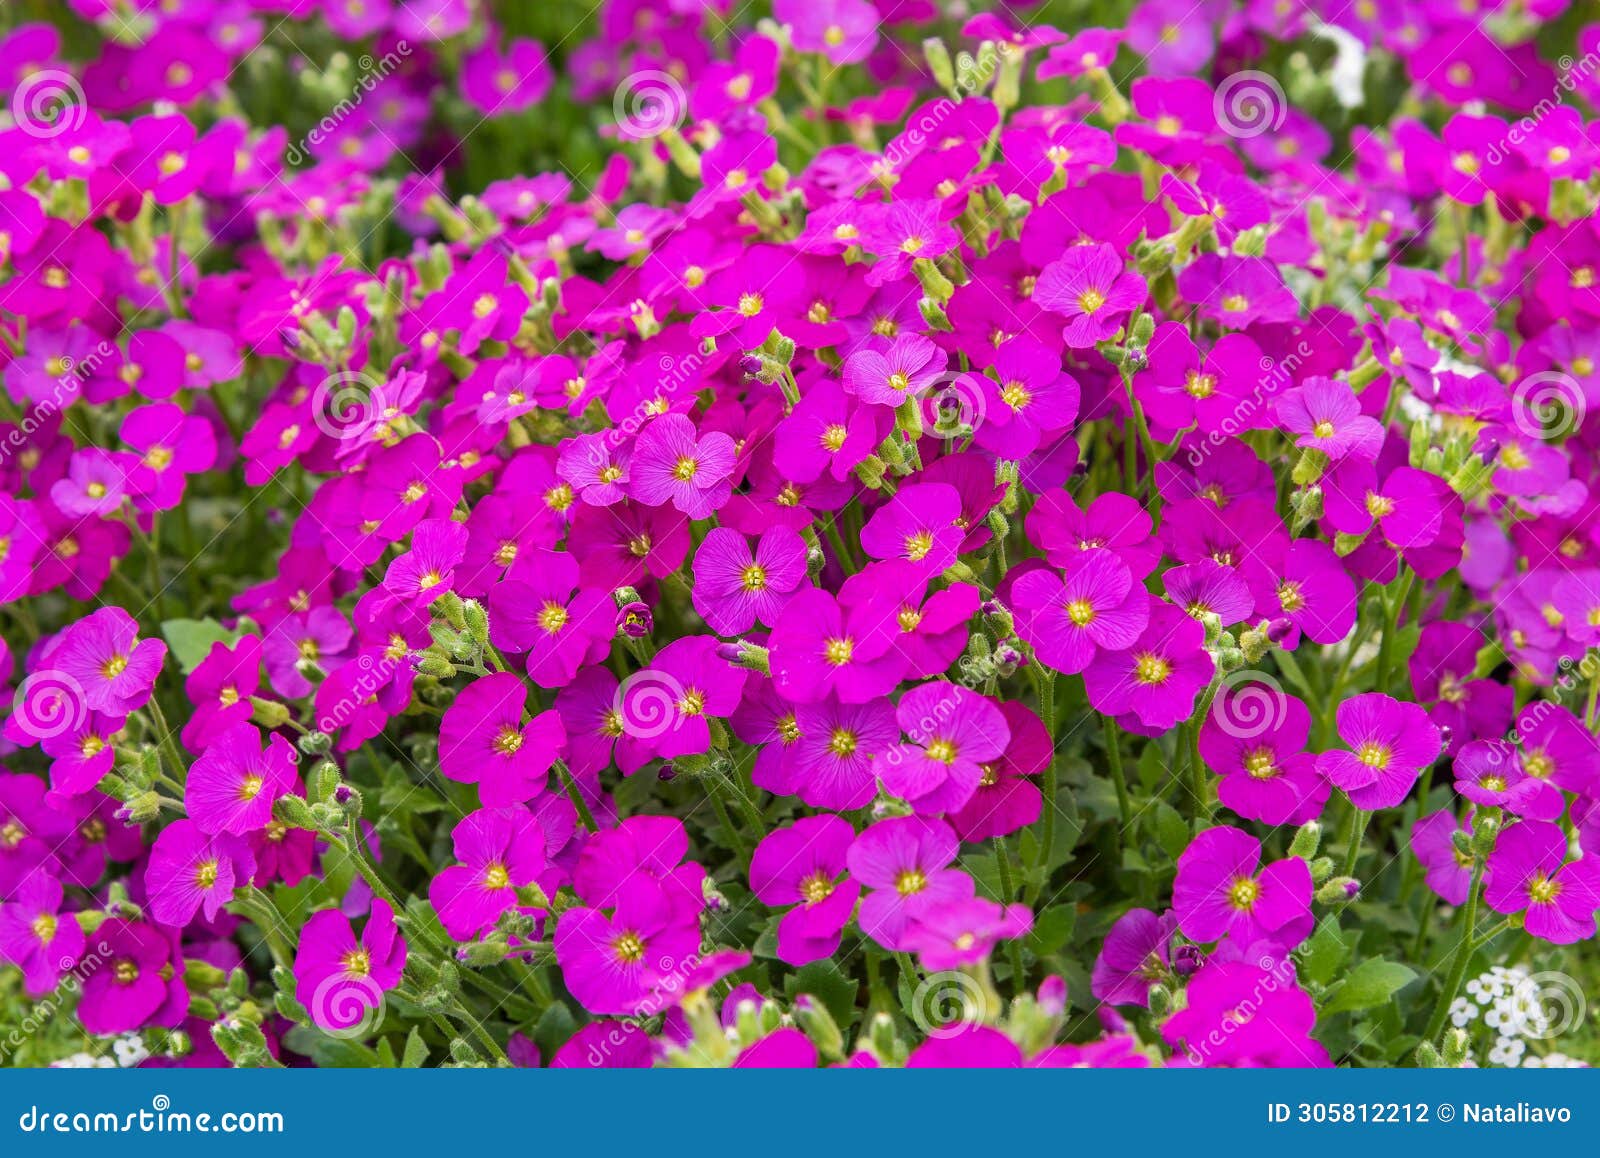 aubrieta florado rose red, a perennial with pink, wheel-d flowers and dark green leaves. flowers background